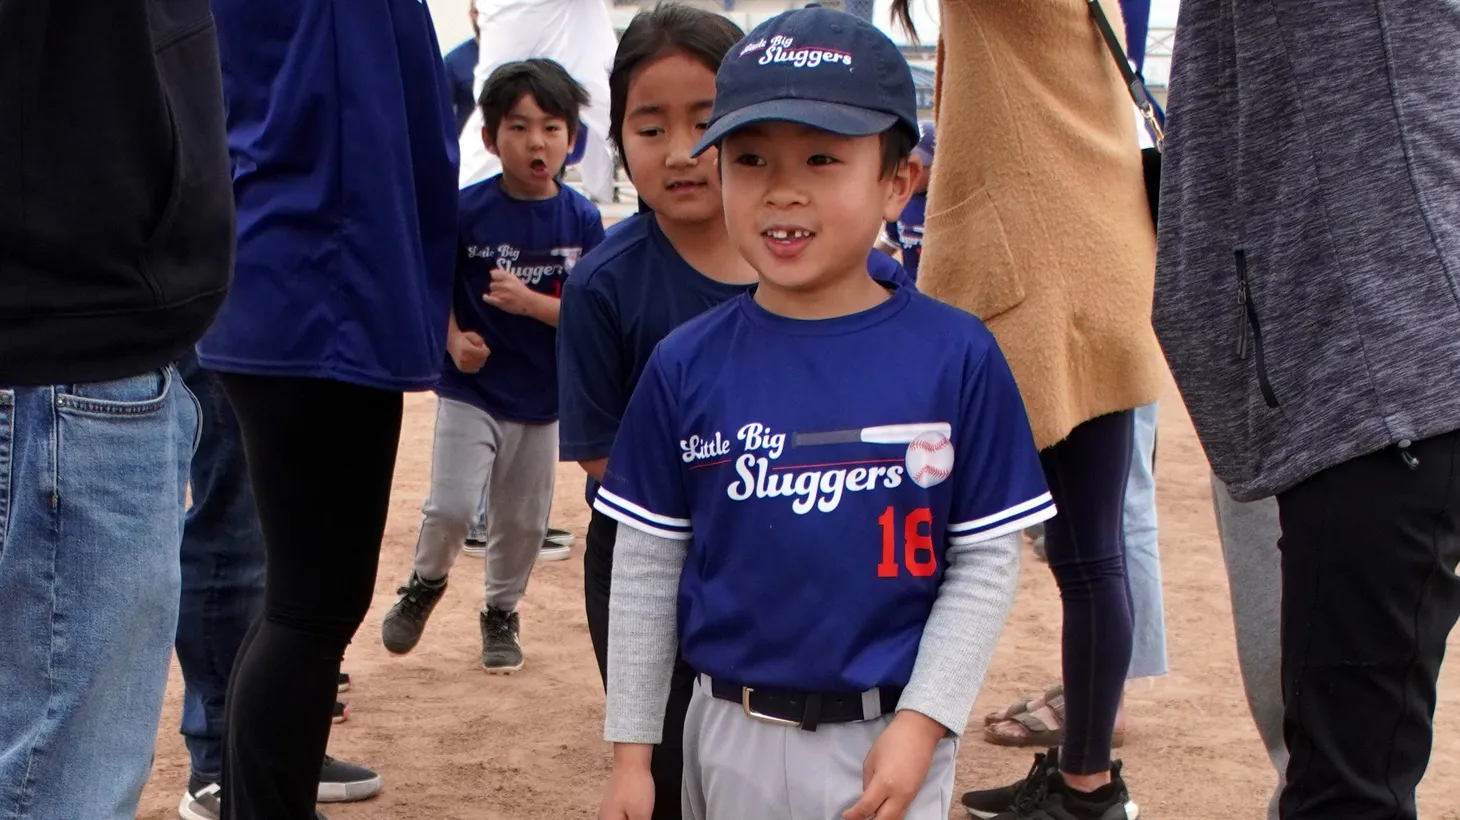 Eli Yano, a player on the Little Big Sluggers team, emerges from the tunnel of parents — a tradition at the end of T-ball games.